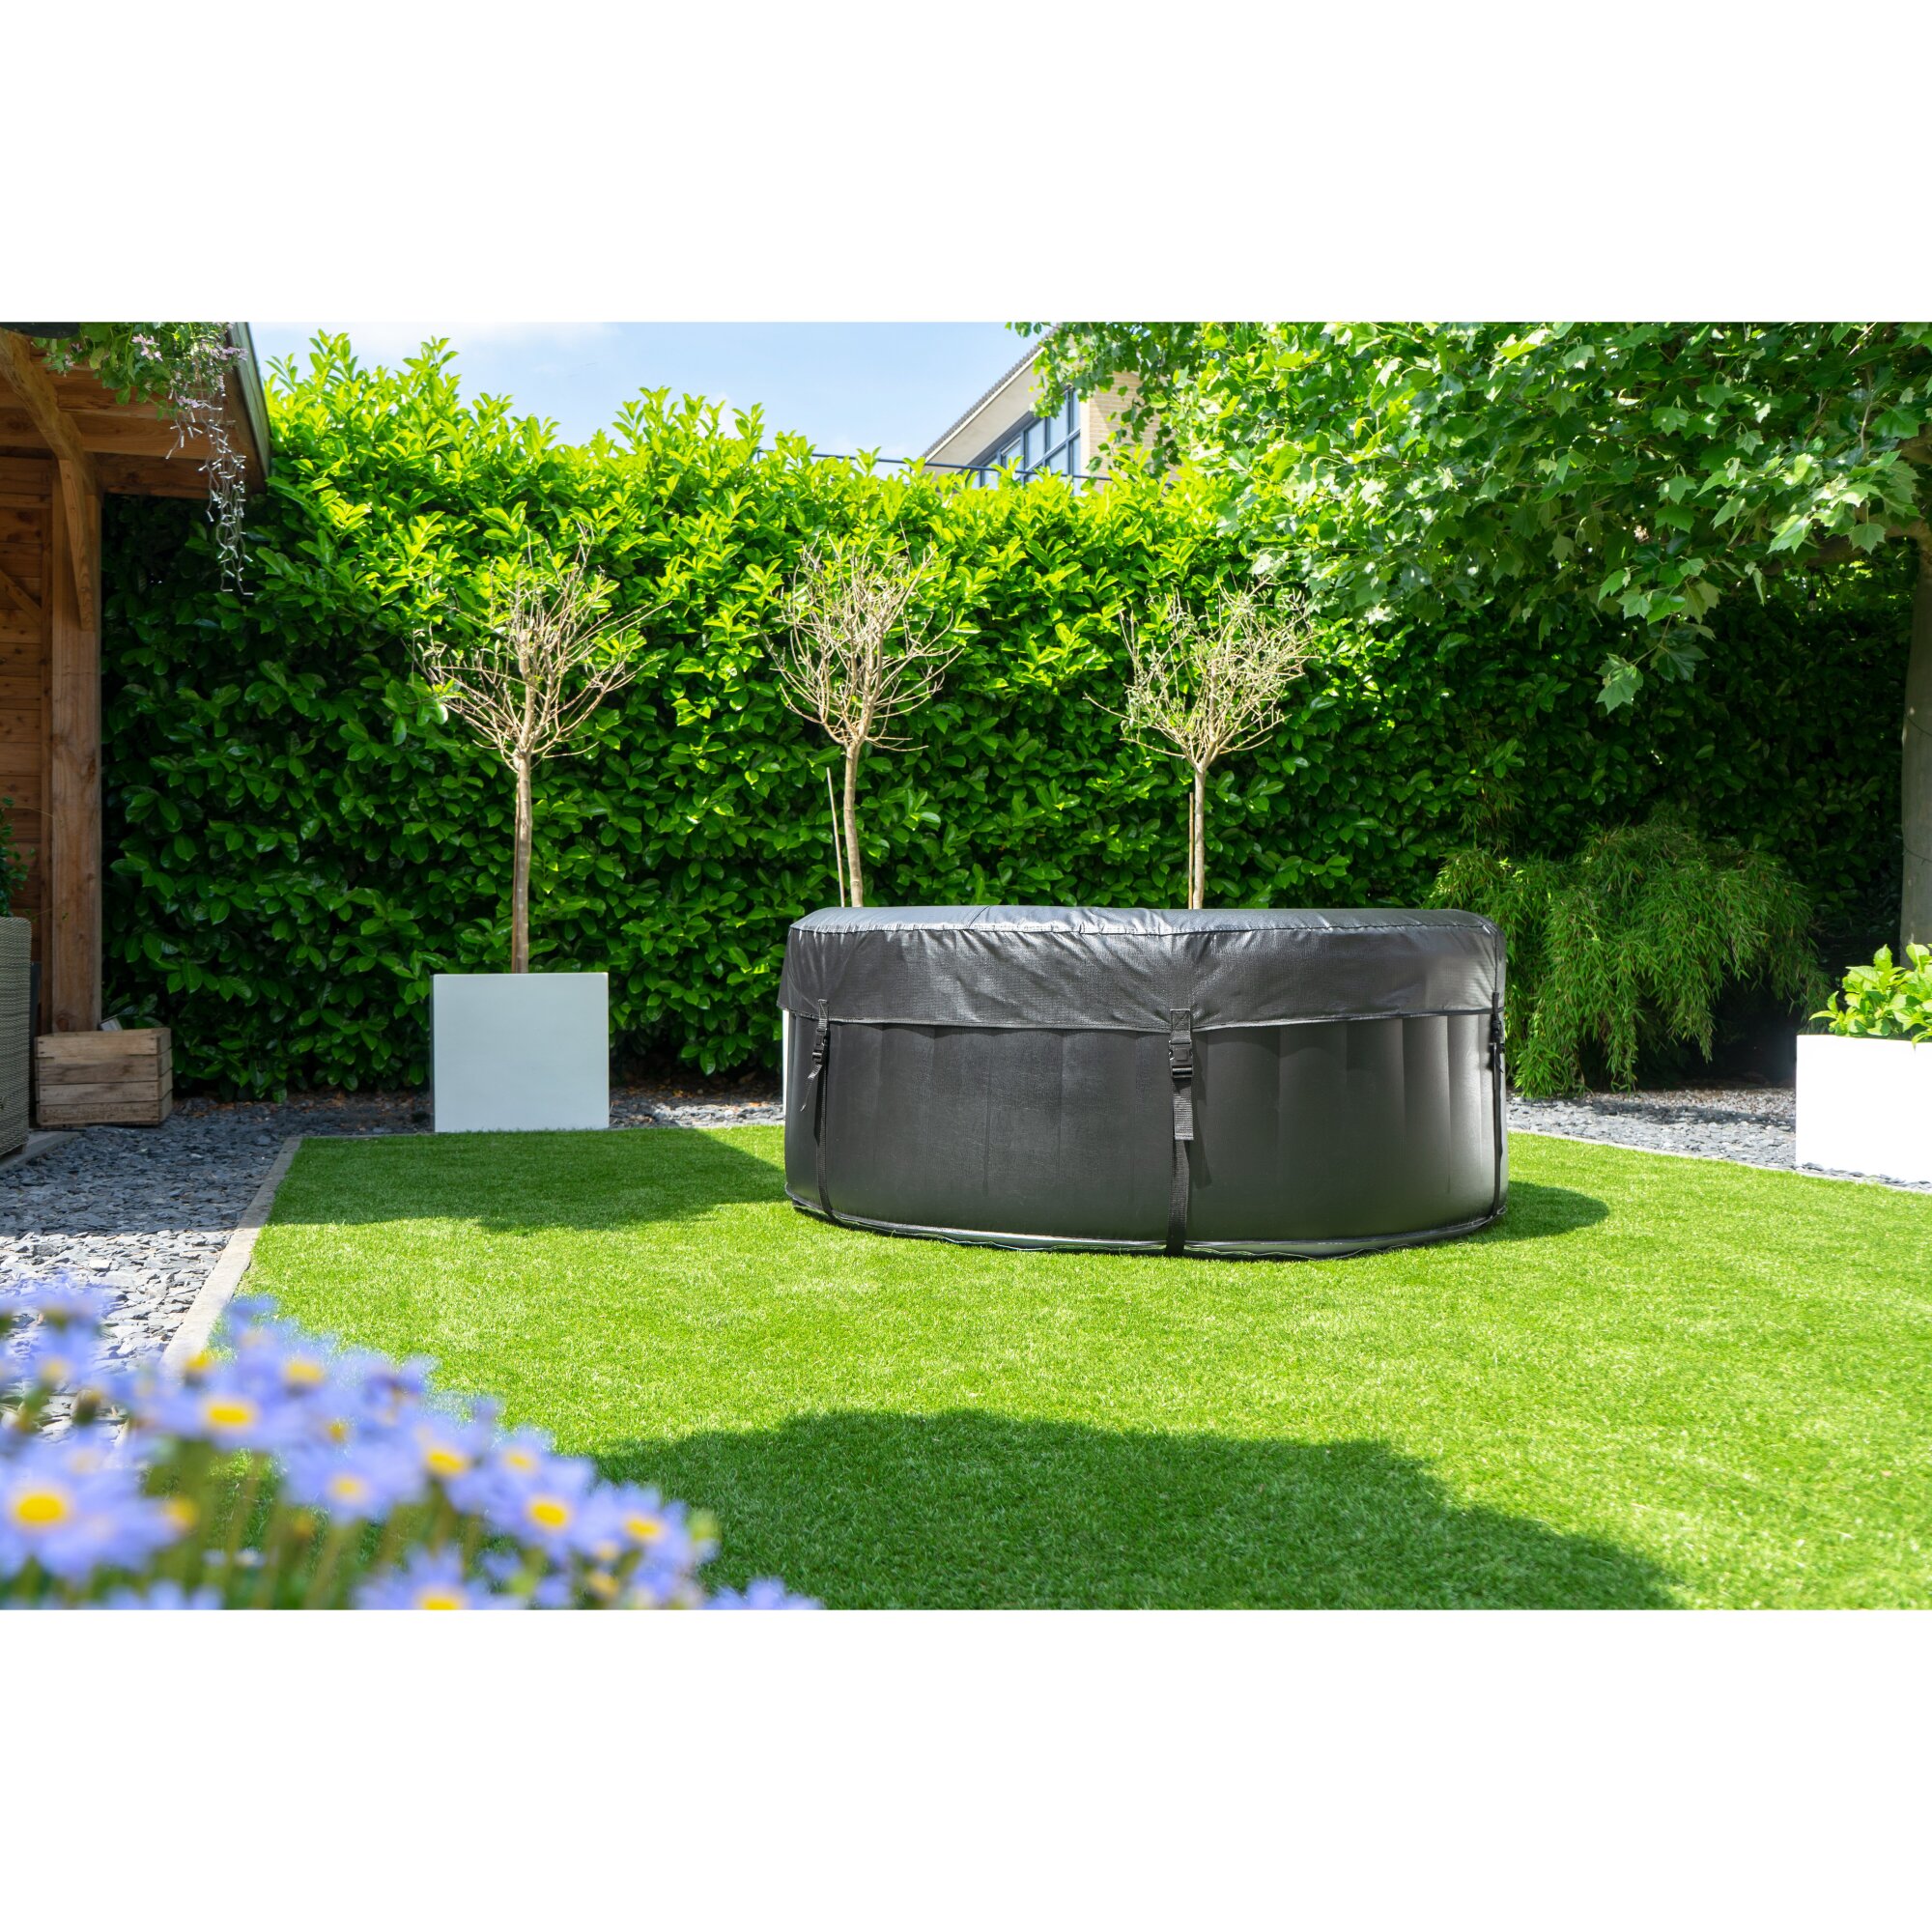 EXIT Silver Classic spa (2 persons) - black